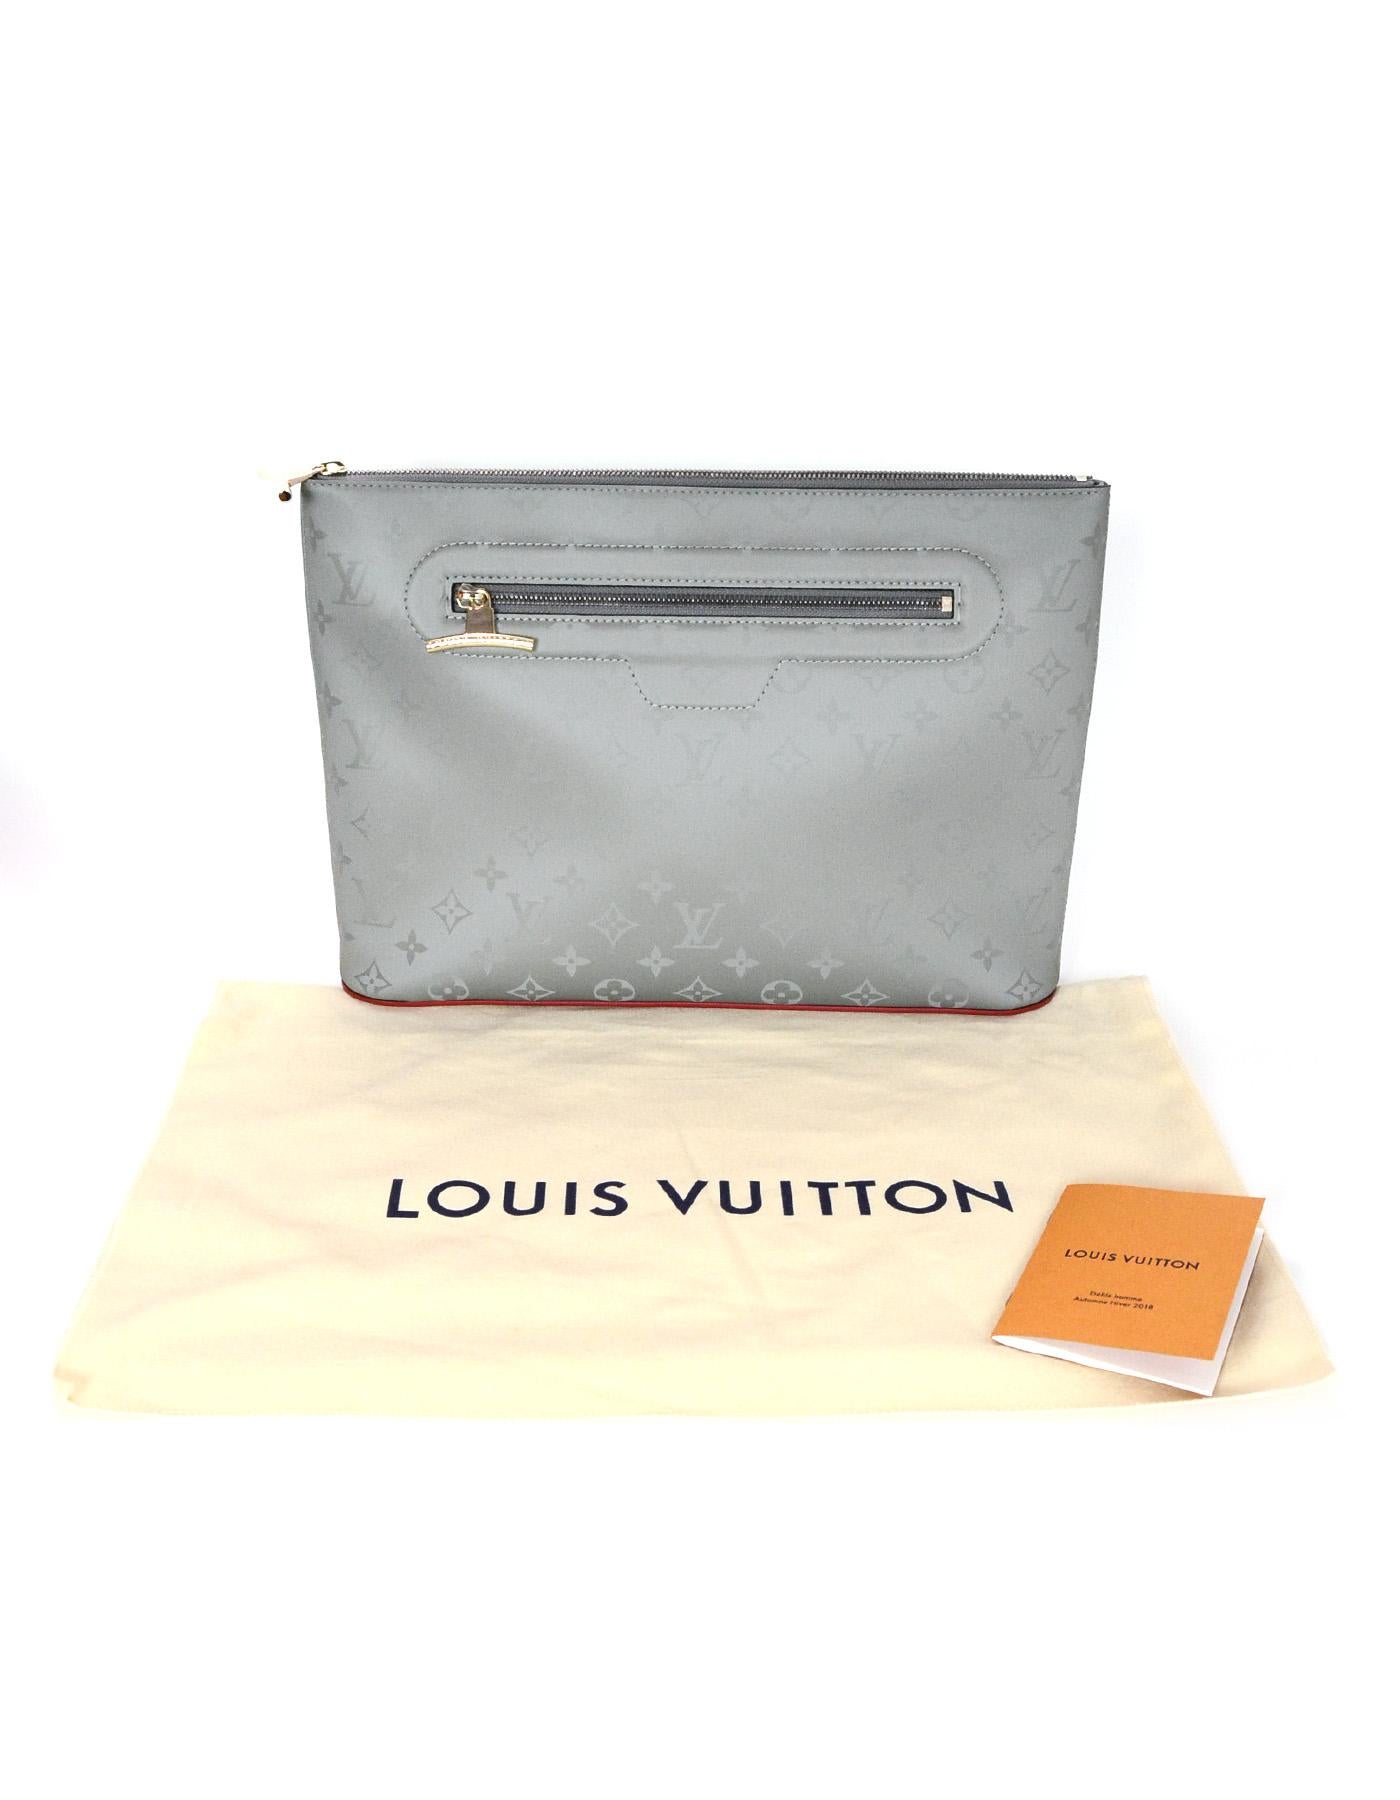 Louis Vuitton LV, 2018, New Monogram Grey Titanium Pochette Cosmos Bag

Made In: Italy
Year of Production: 2018
Color: Grey
Hardware: Silvertone
Materials: Titanium, canvas, and leather
Lining: Grey textile
Closure/Opening: Zipper top
Exterior